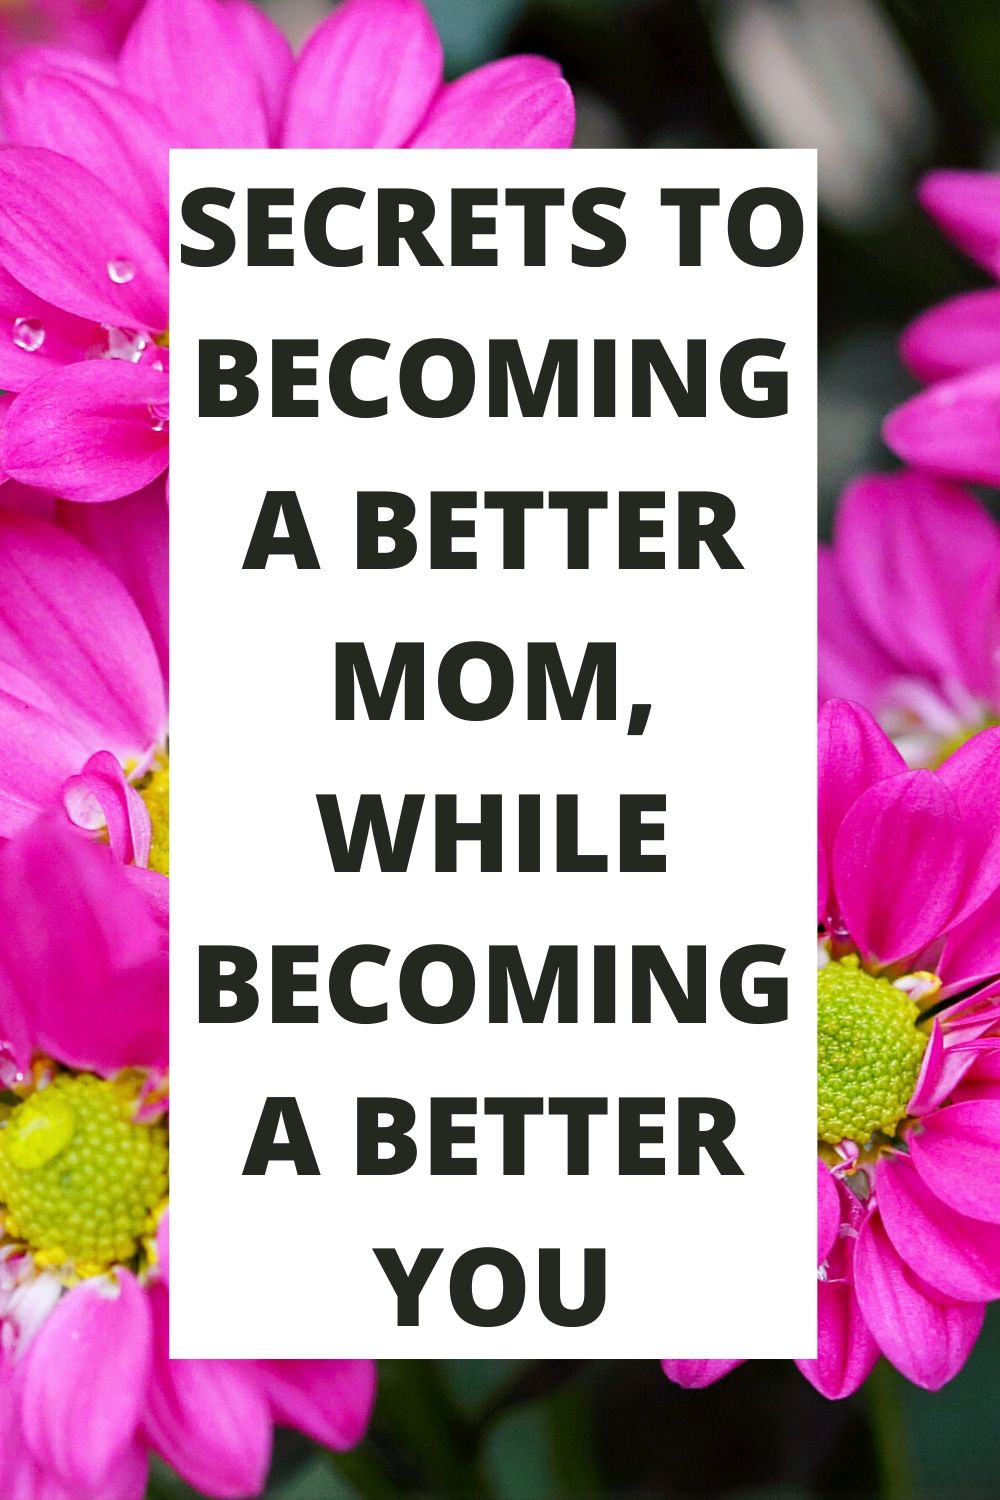 Secrets to Becoming a better mom landing page